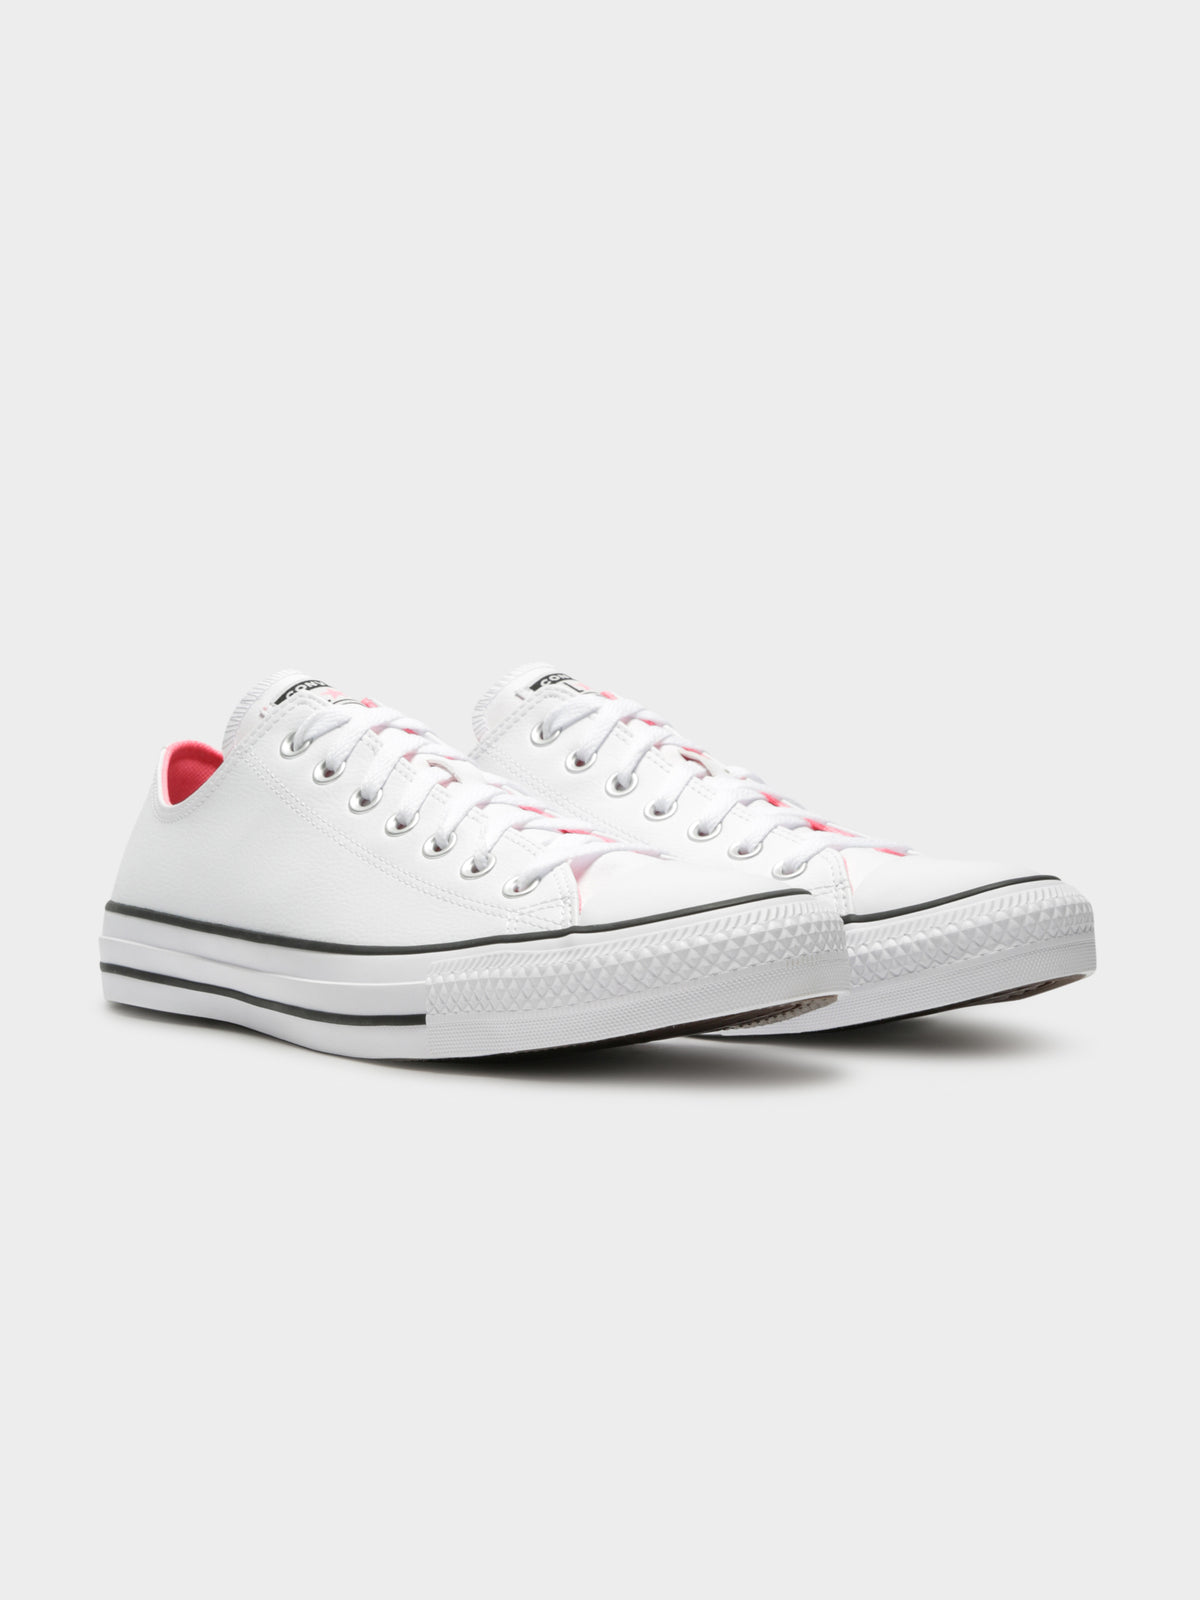 Unisex Chuck Taylor Ox All Star Sneakers in White &amp;amp; Electric Pink